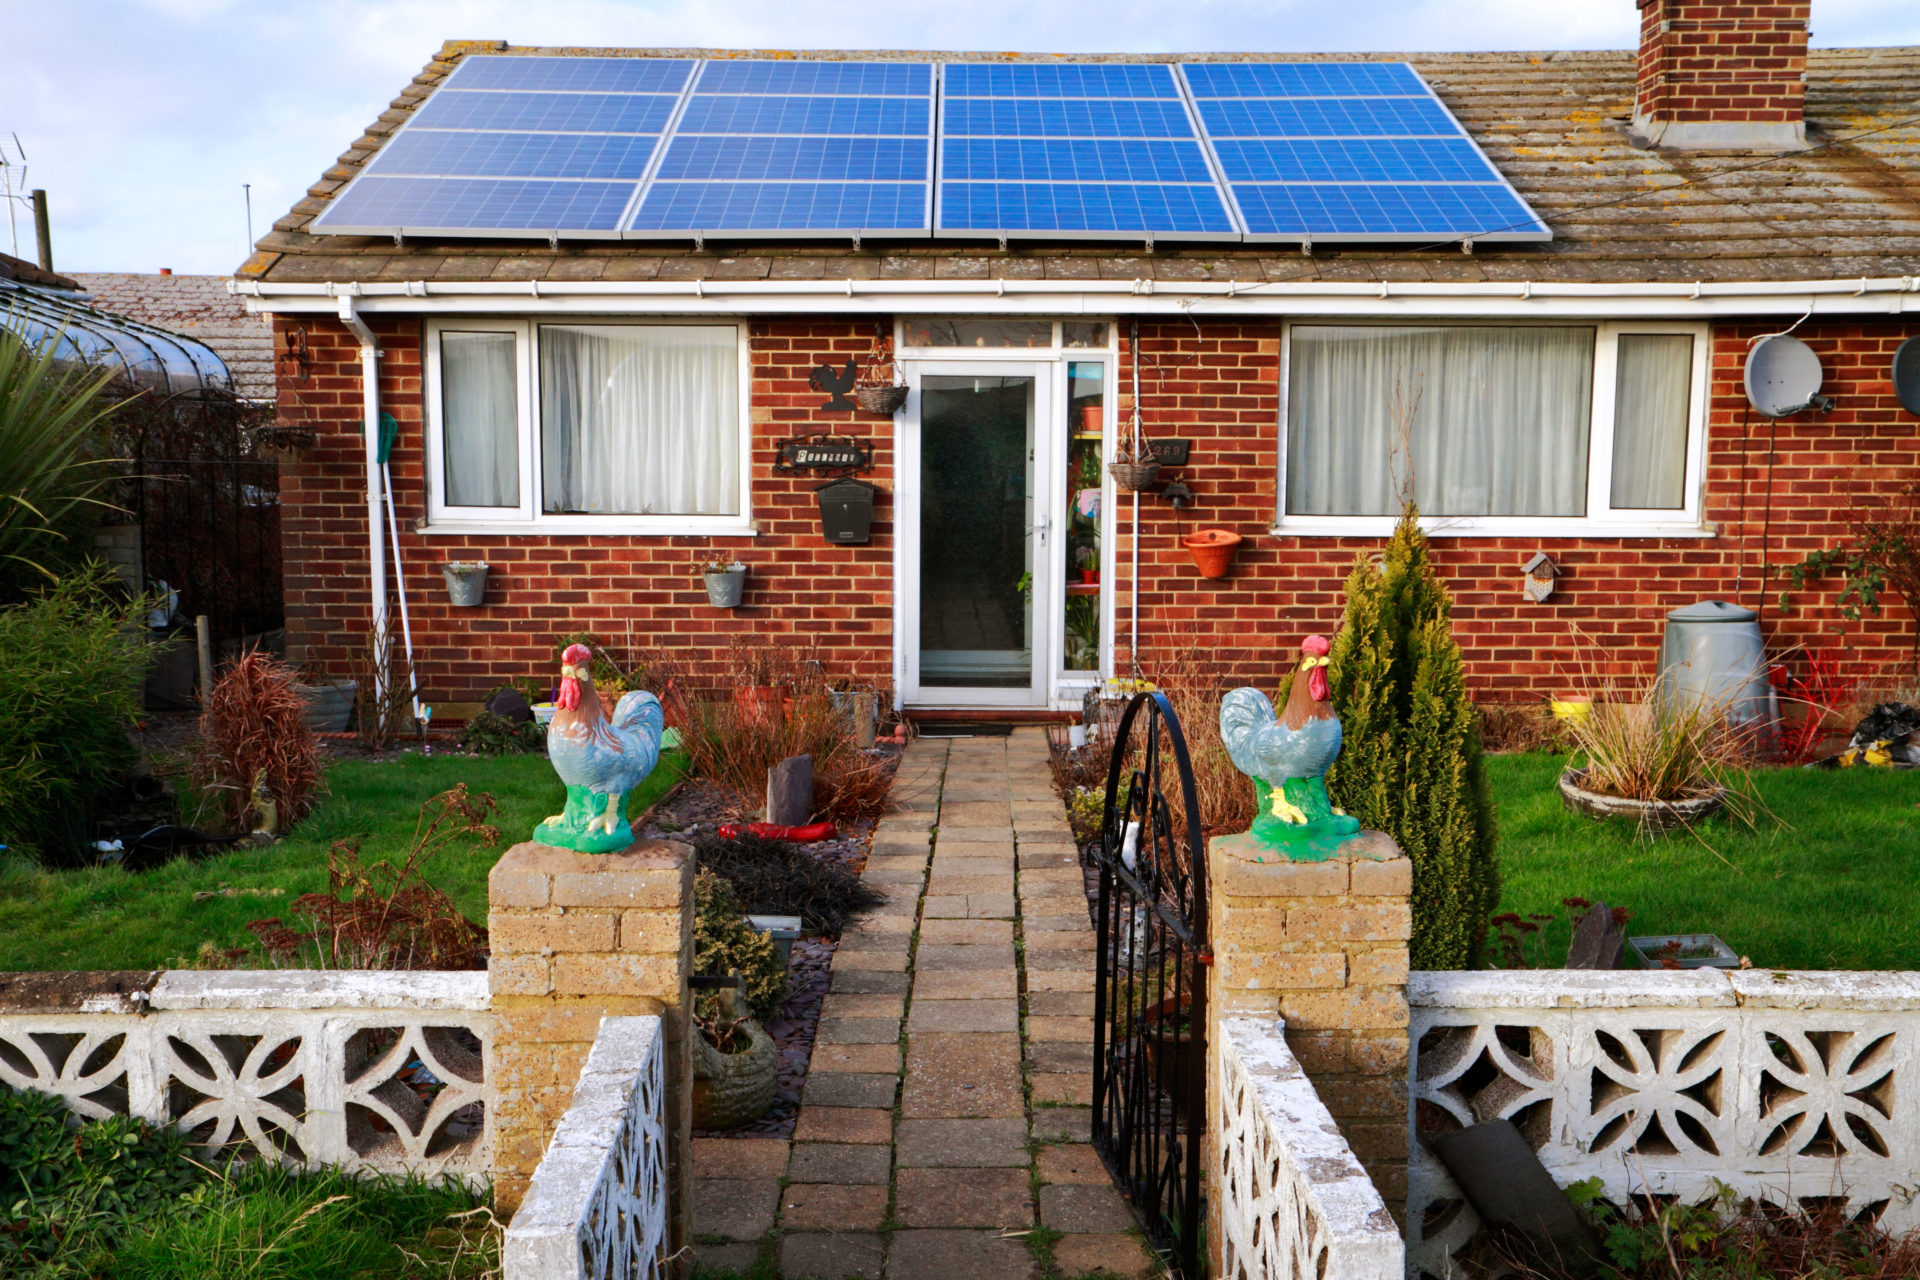 Bungalow with solar panels on roof, Leysdown, Isle of Bungalow with solar panels on roof, Leysdown, Isle of Sheppey, Kent, UKSheppey, Kent, UK